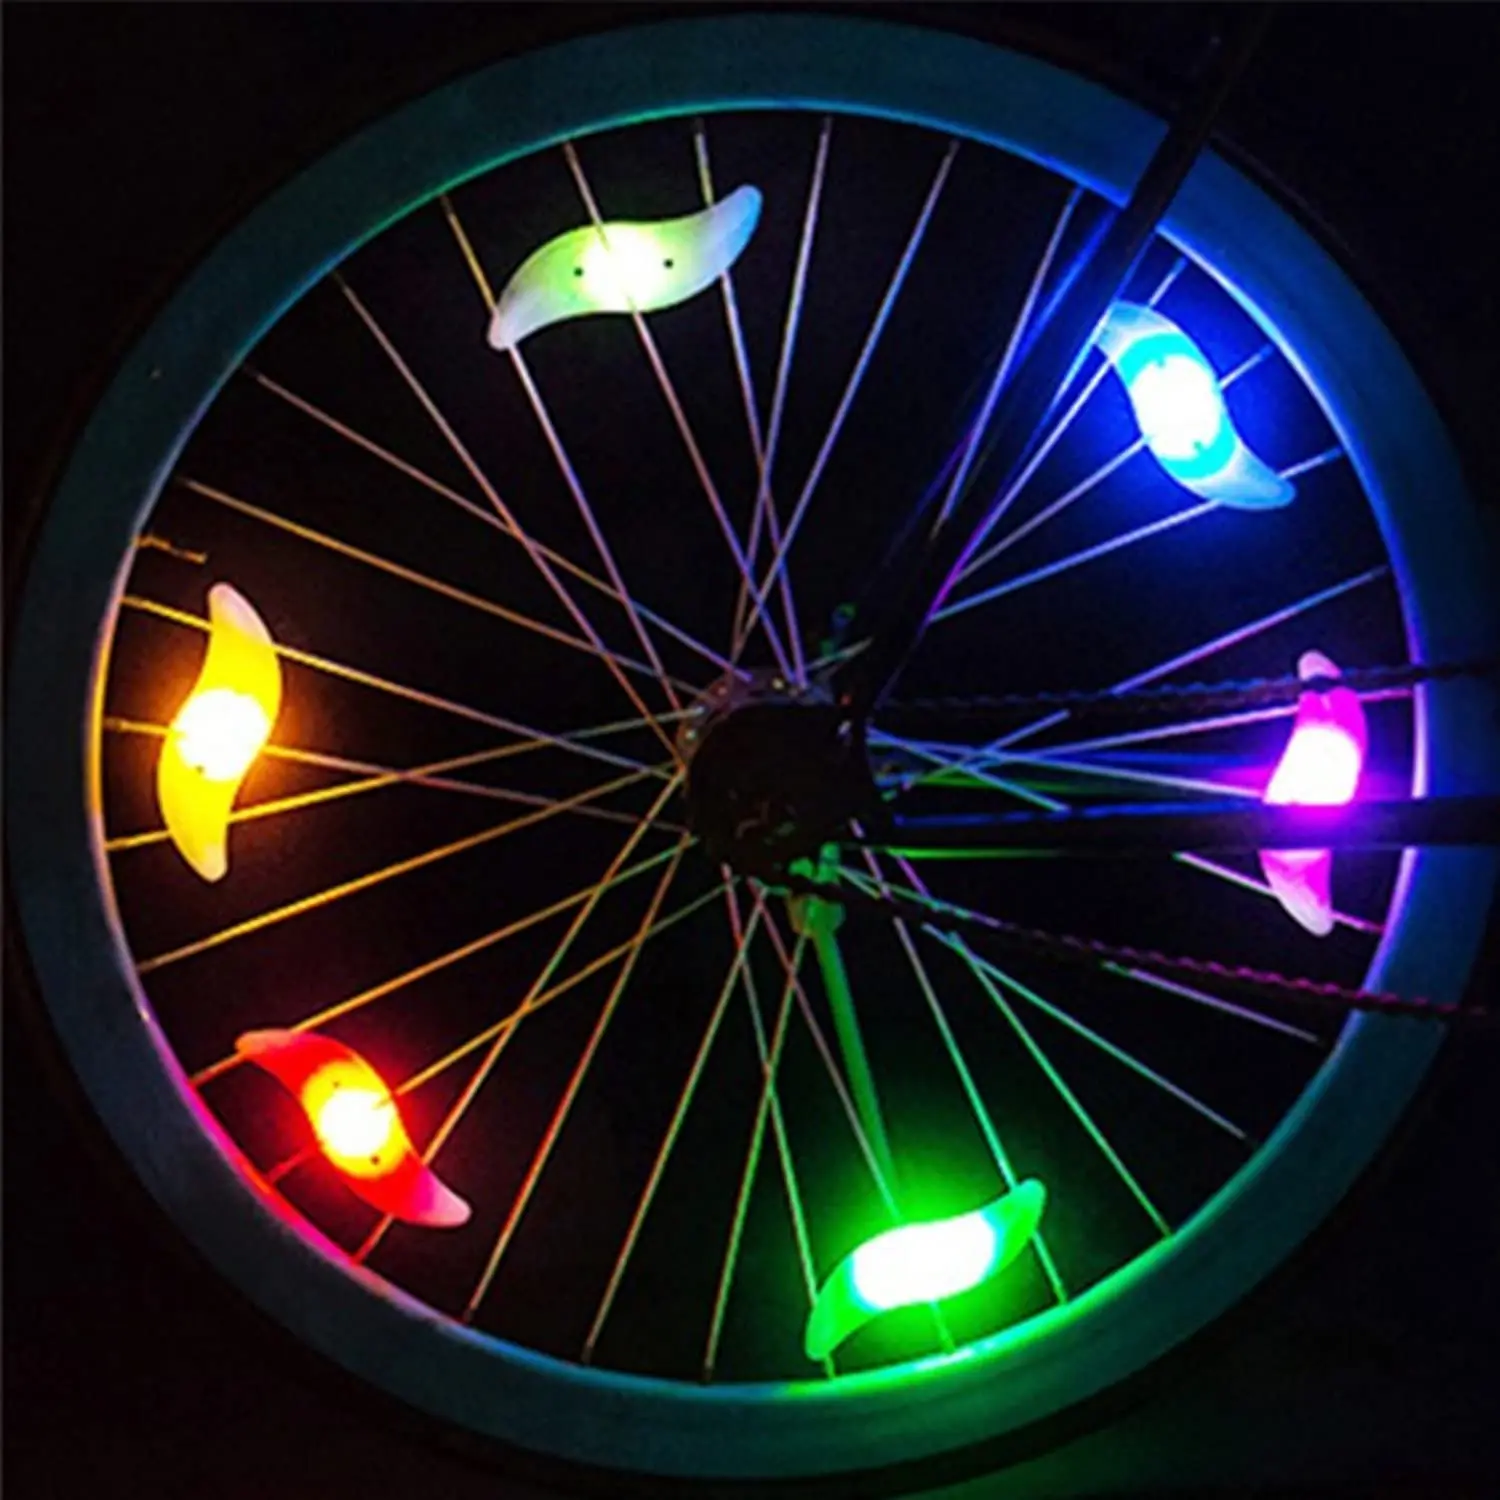 Source Hot Sale Front and Rear Bicycle Light Lithium Battery LED Bike Tail light Cycling Lamp Bicycle Accessories on m.alibaba